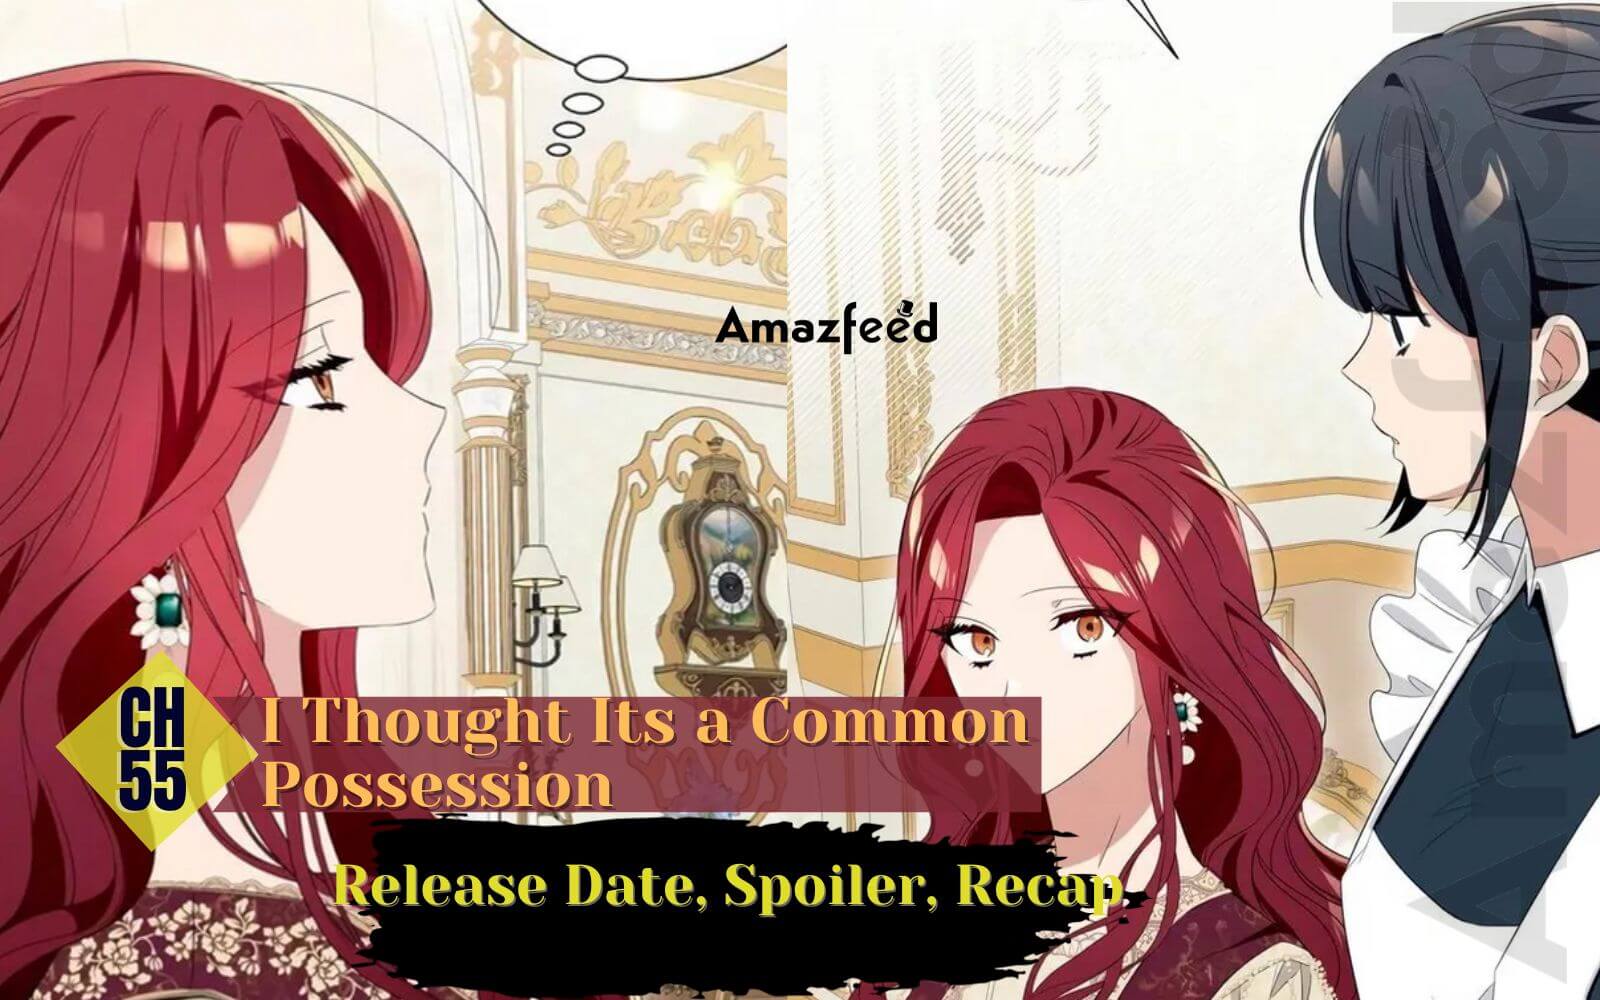 I Thought Its a Common Possession chapter 55 spoiler